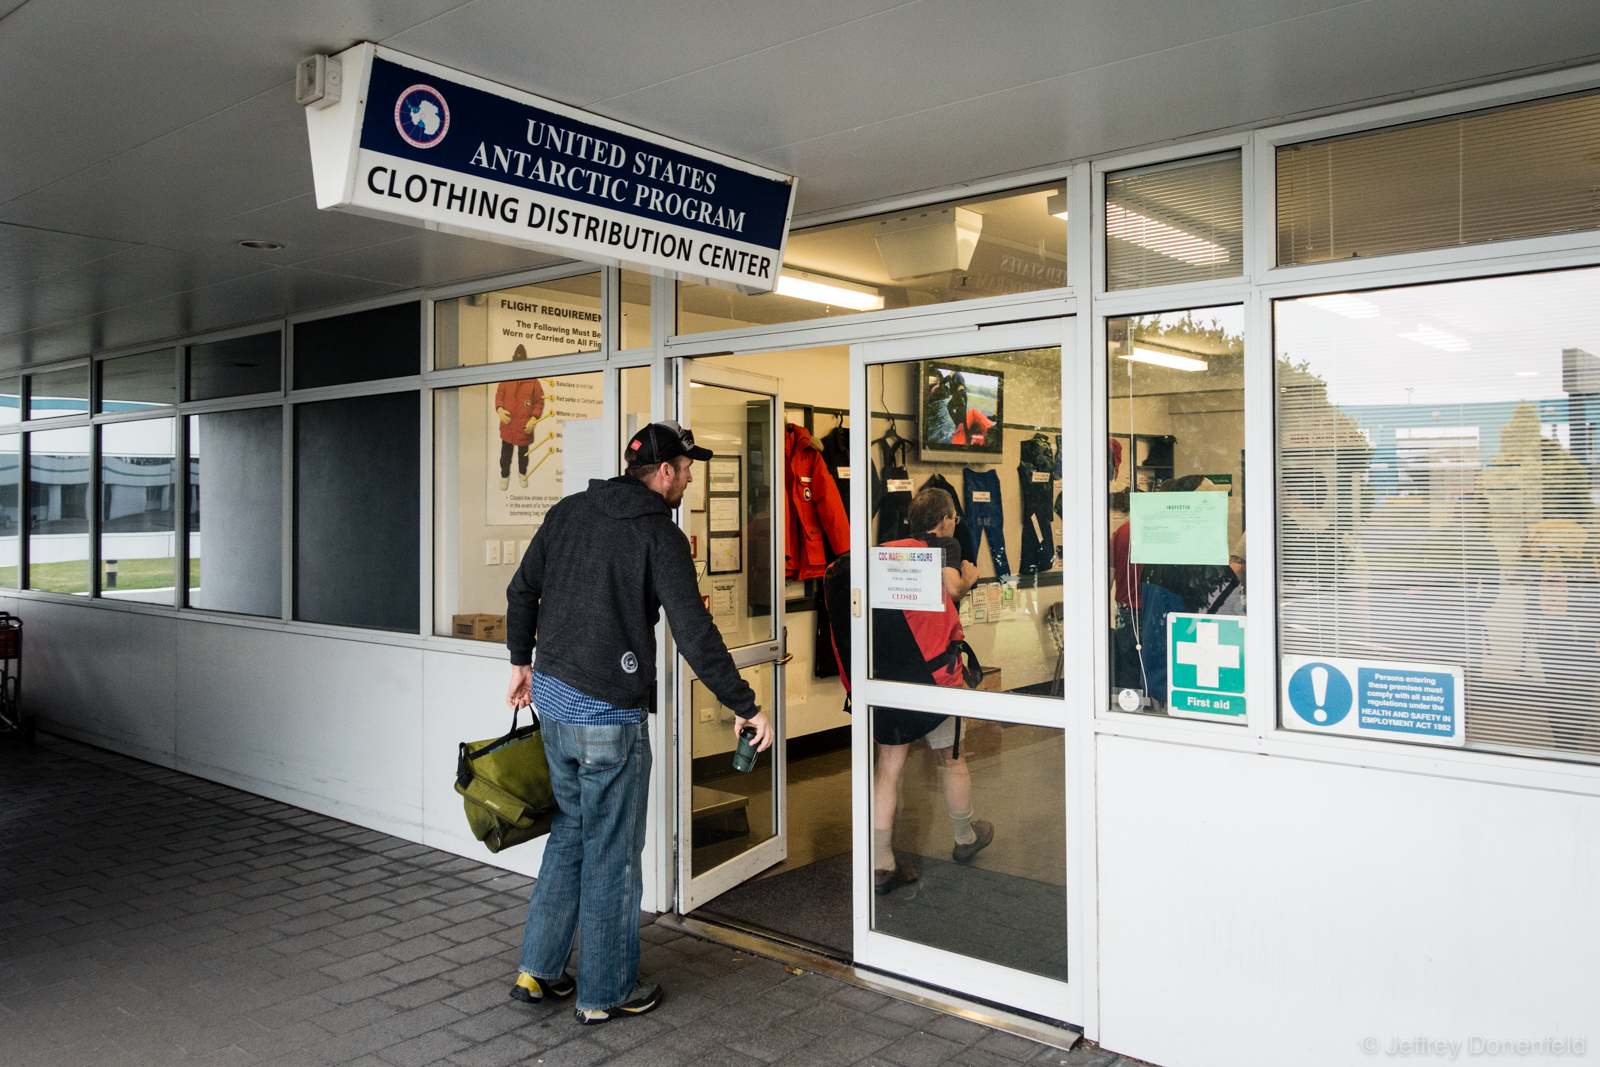 Entering the Clothing Distibuton Center in Christchurch, New Zealand. It's here we receive our Extreme Cold Weather gear issue, as well as go through basic briefing for our upcoming travel.